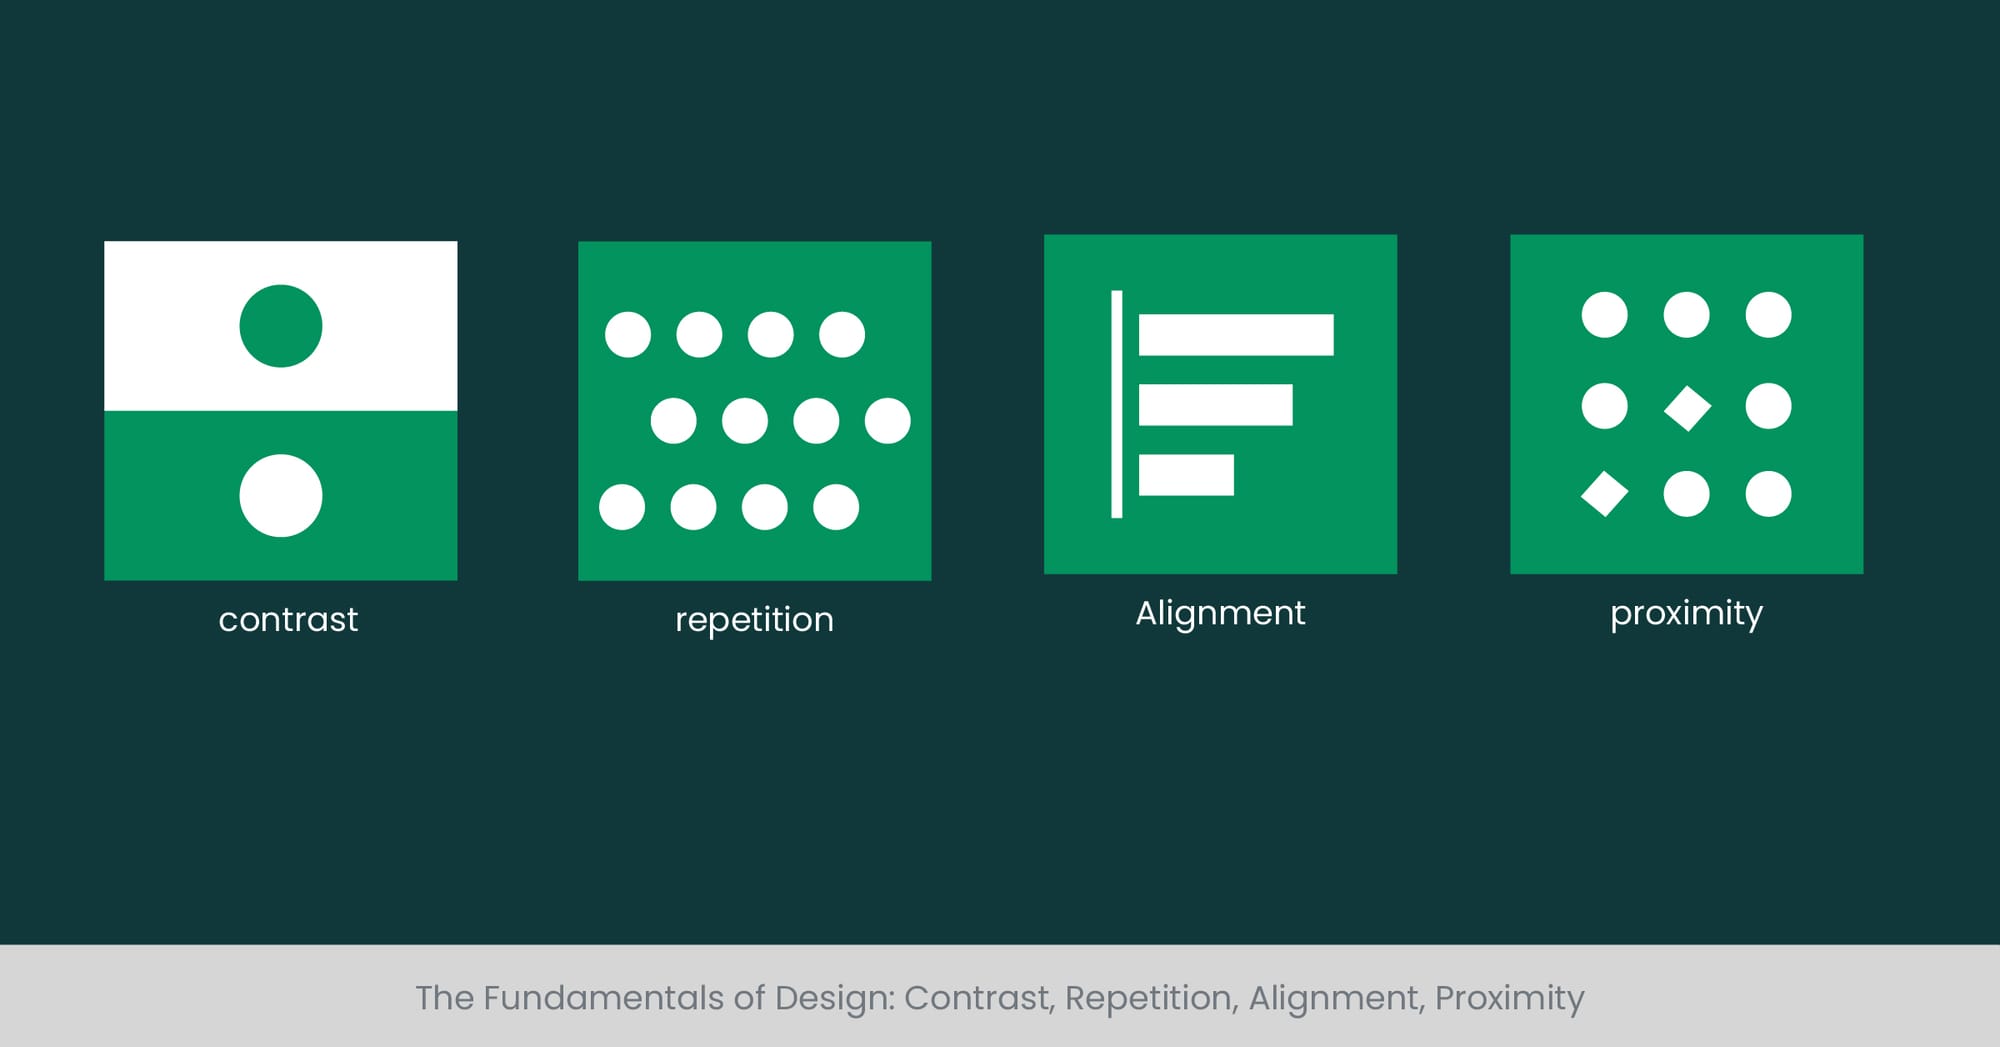 The Fundamentals of Design: Contrast, Repetition, Alignment, Proximity